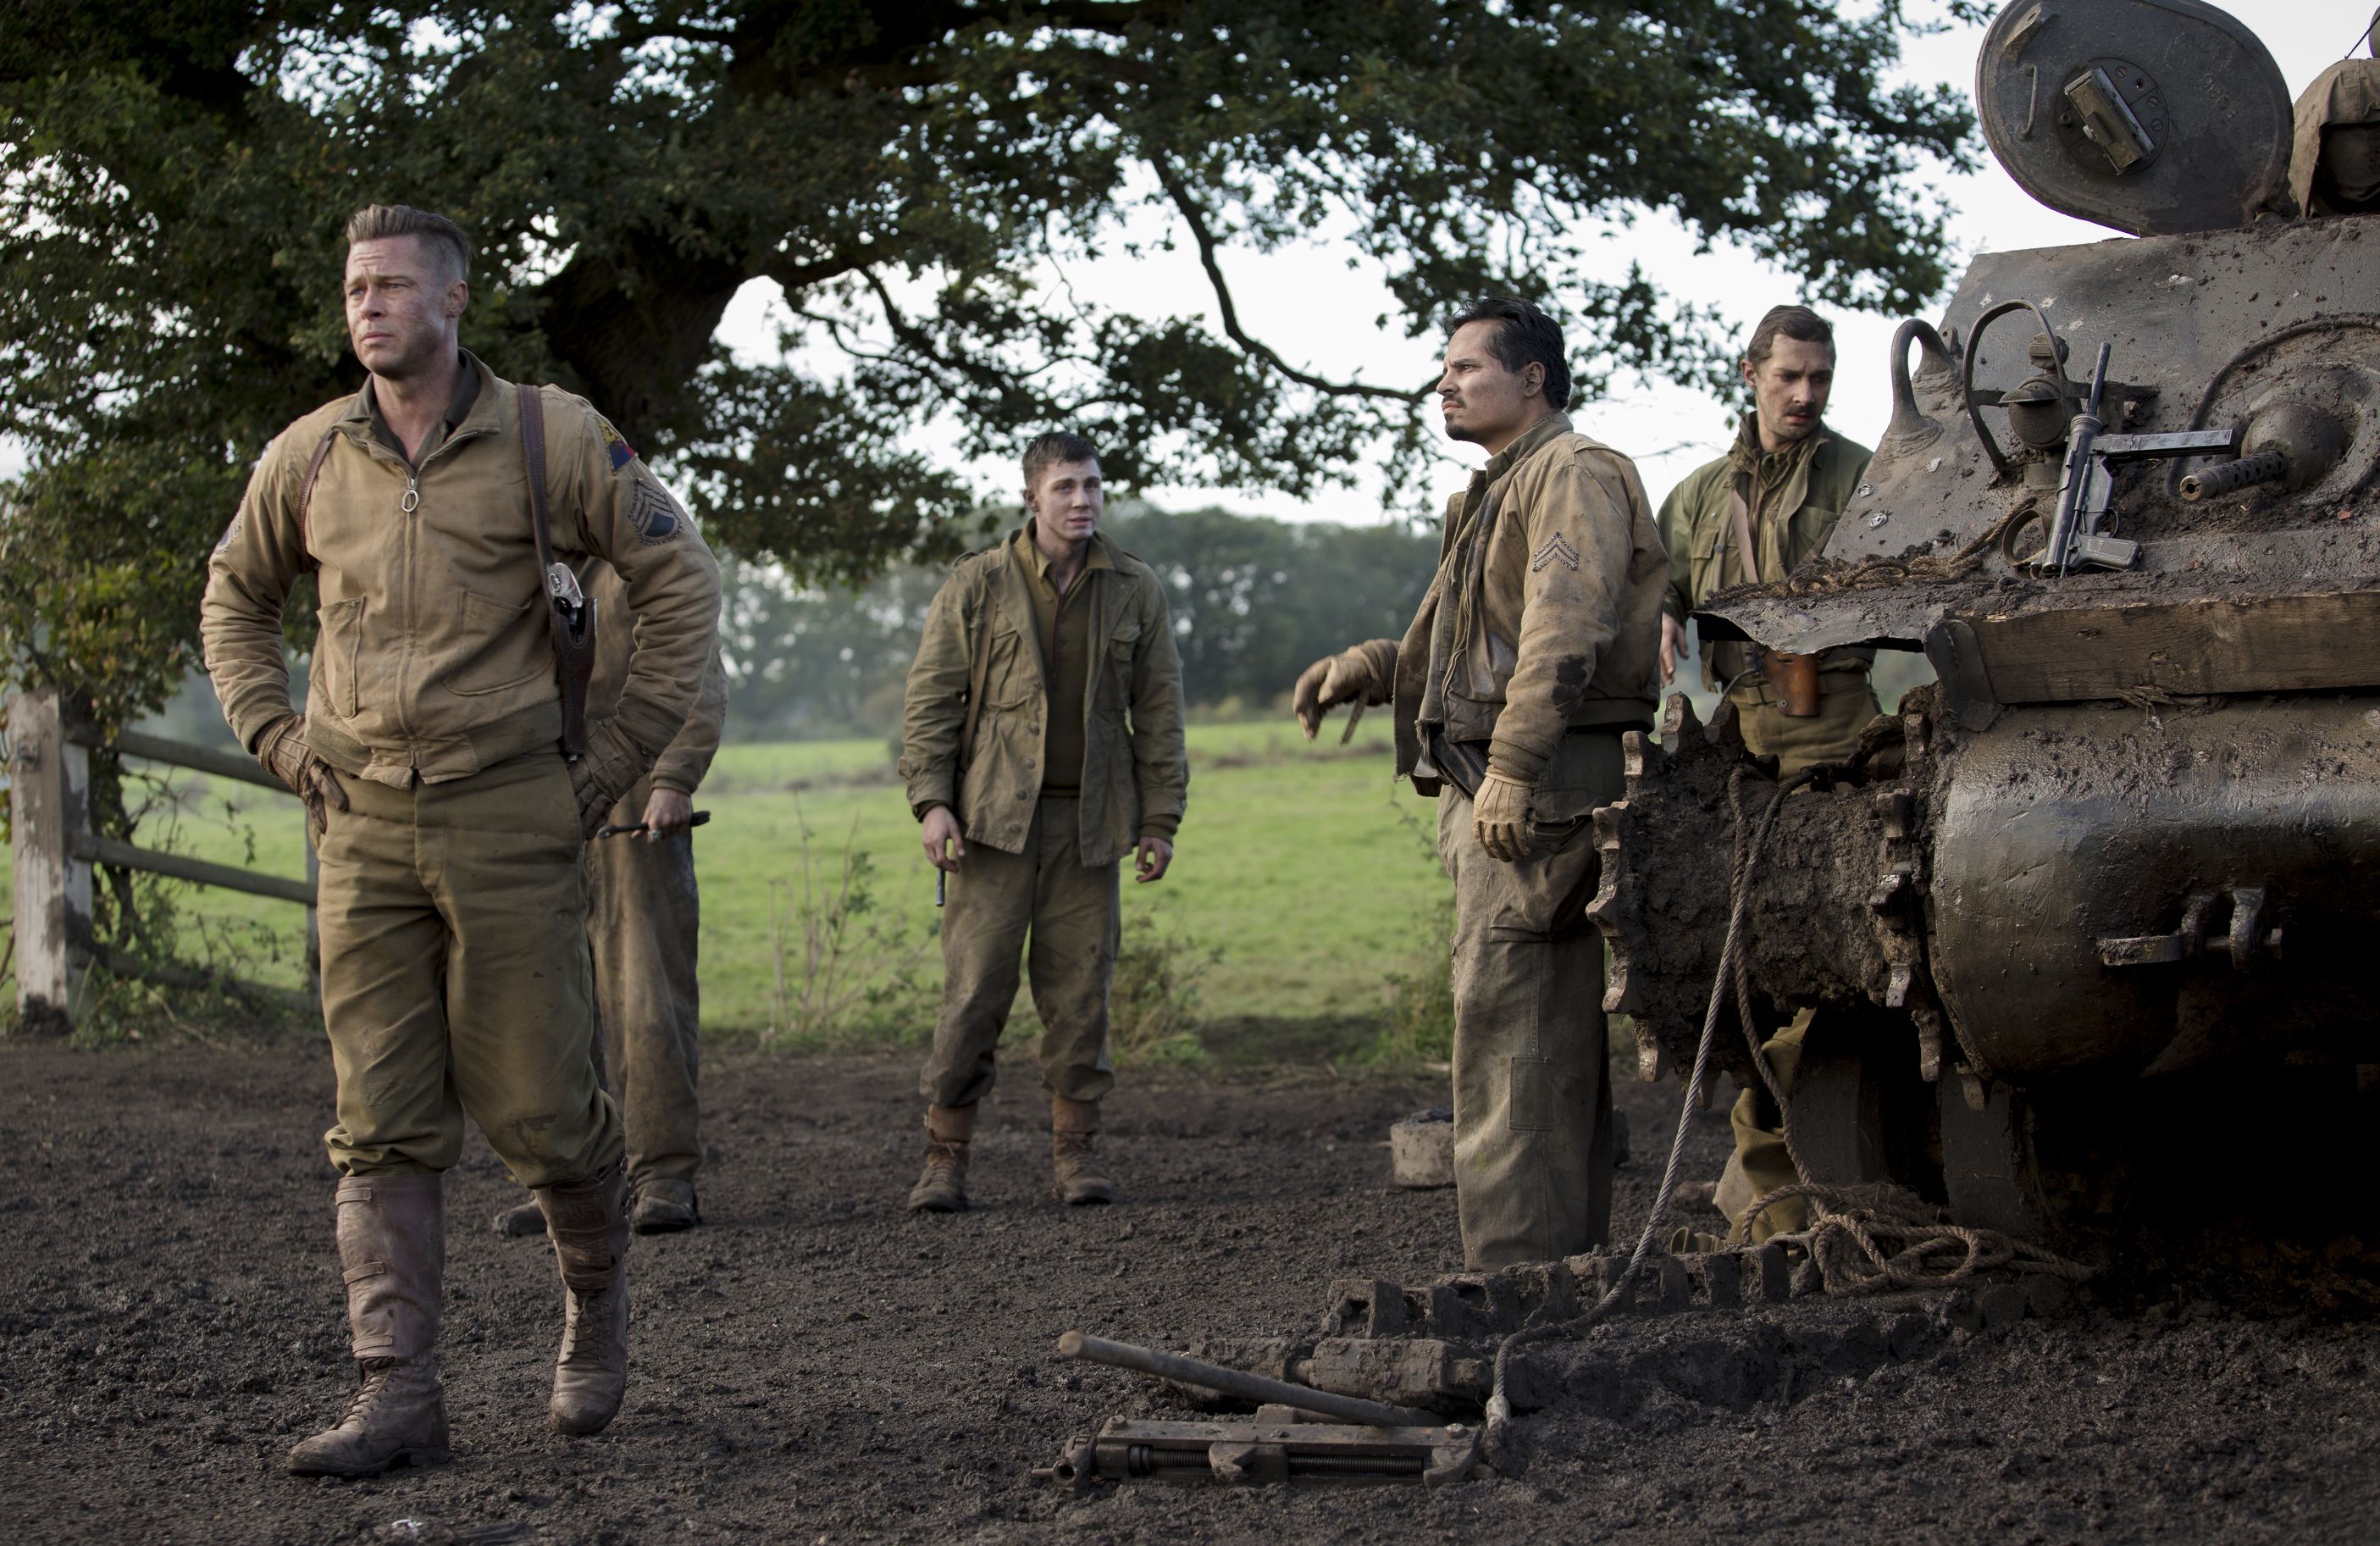 Brad Pitt and his crew in Fury